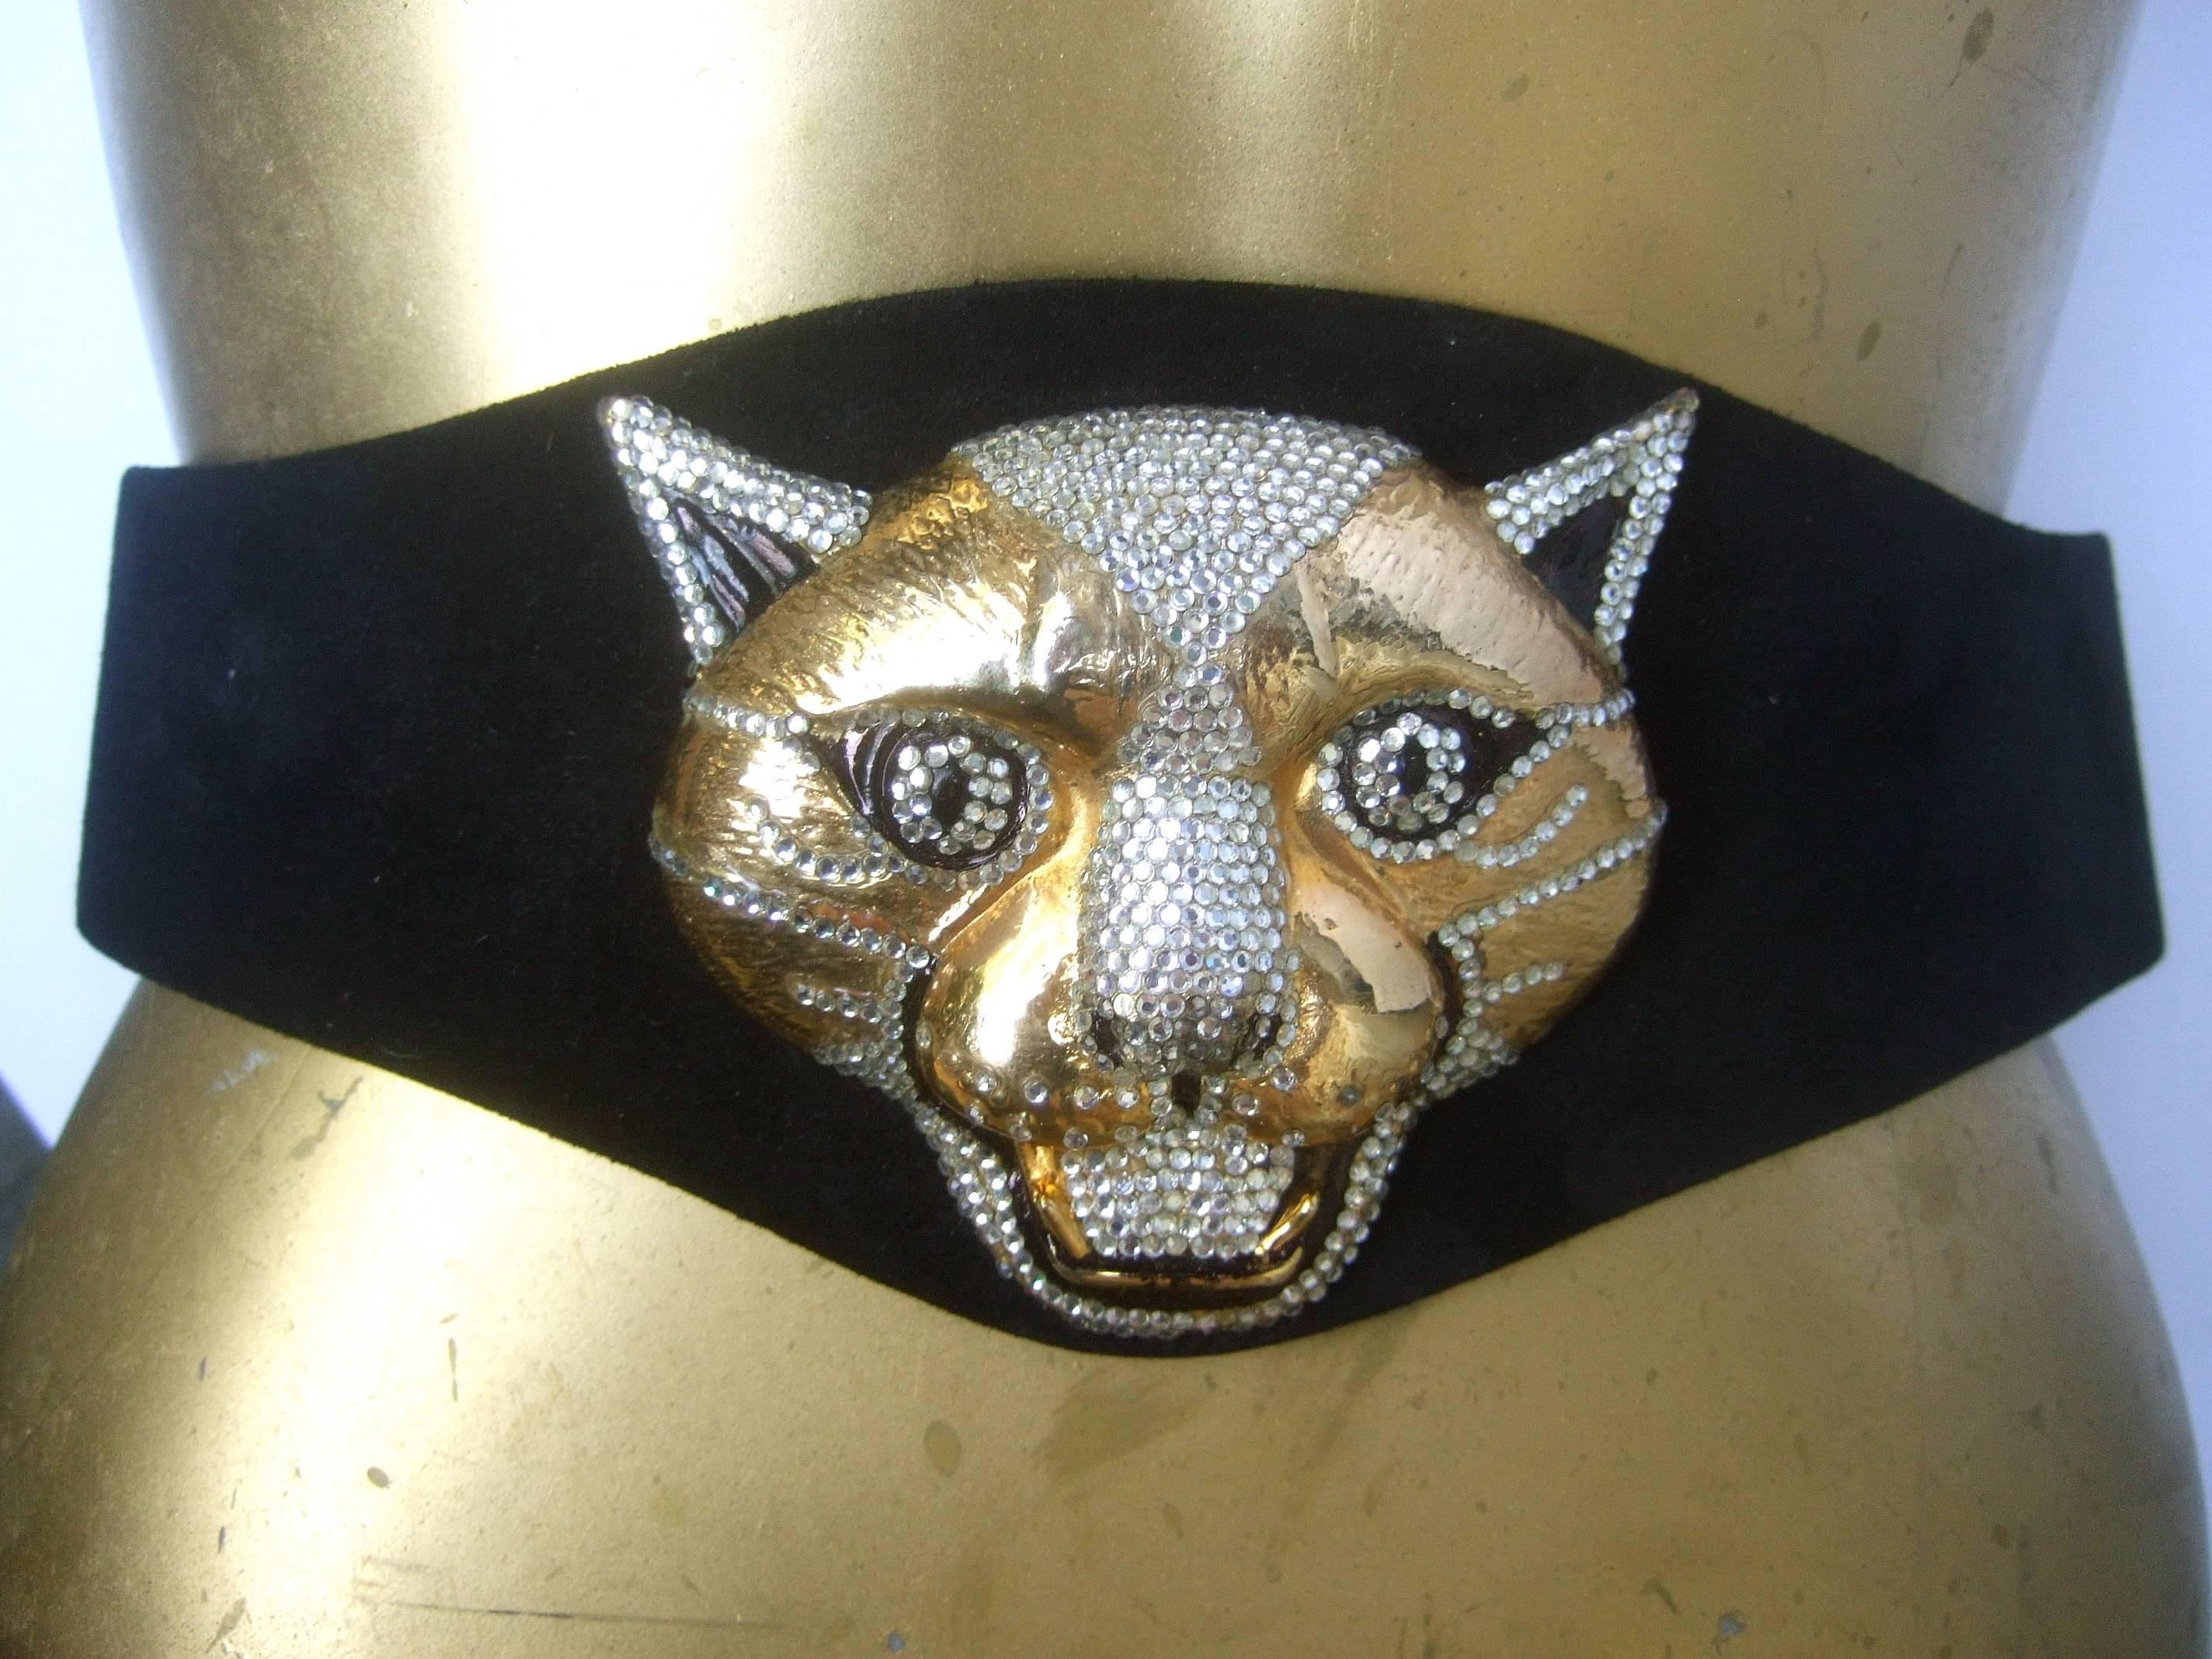 Spectacular massive jeweled suede panther buckle belt c 1970
The incredible belt is adorned with a huge gilt metal 
panther's head encrusted with glittering diamante crystals 

The panther's face is accented with black enamel 
and exposed